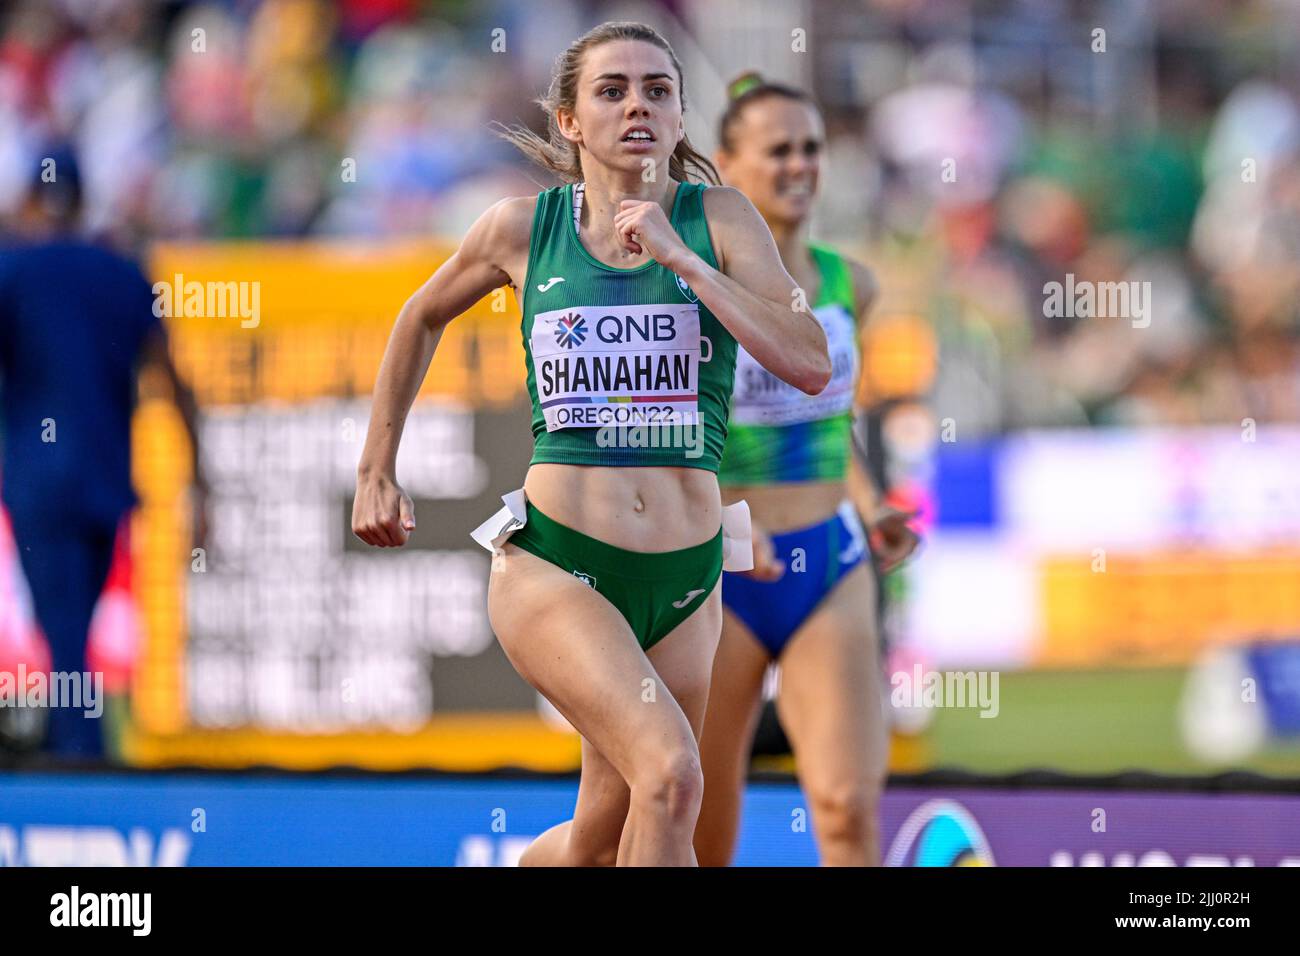 EUGENE, UNITED STATES - JULY 21: Louise Shanahan of Ireland competing on Women's 800m during the World Athletics Championships on July 21, 2022 in Eugene, United States (Photo by Andy Astfalck/BSR Agency) Atletiekunie Stock Photo